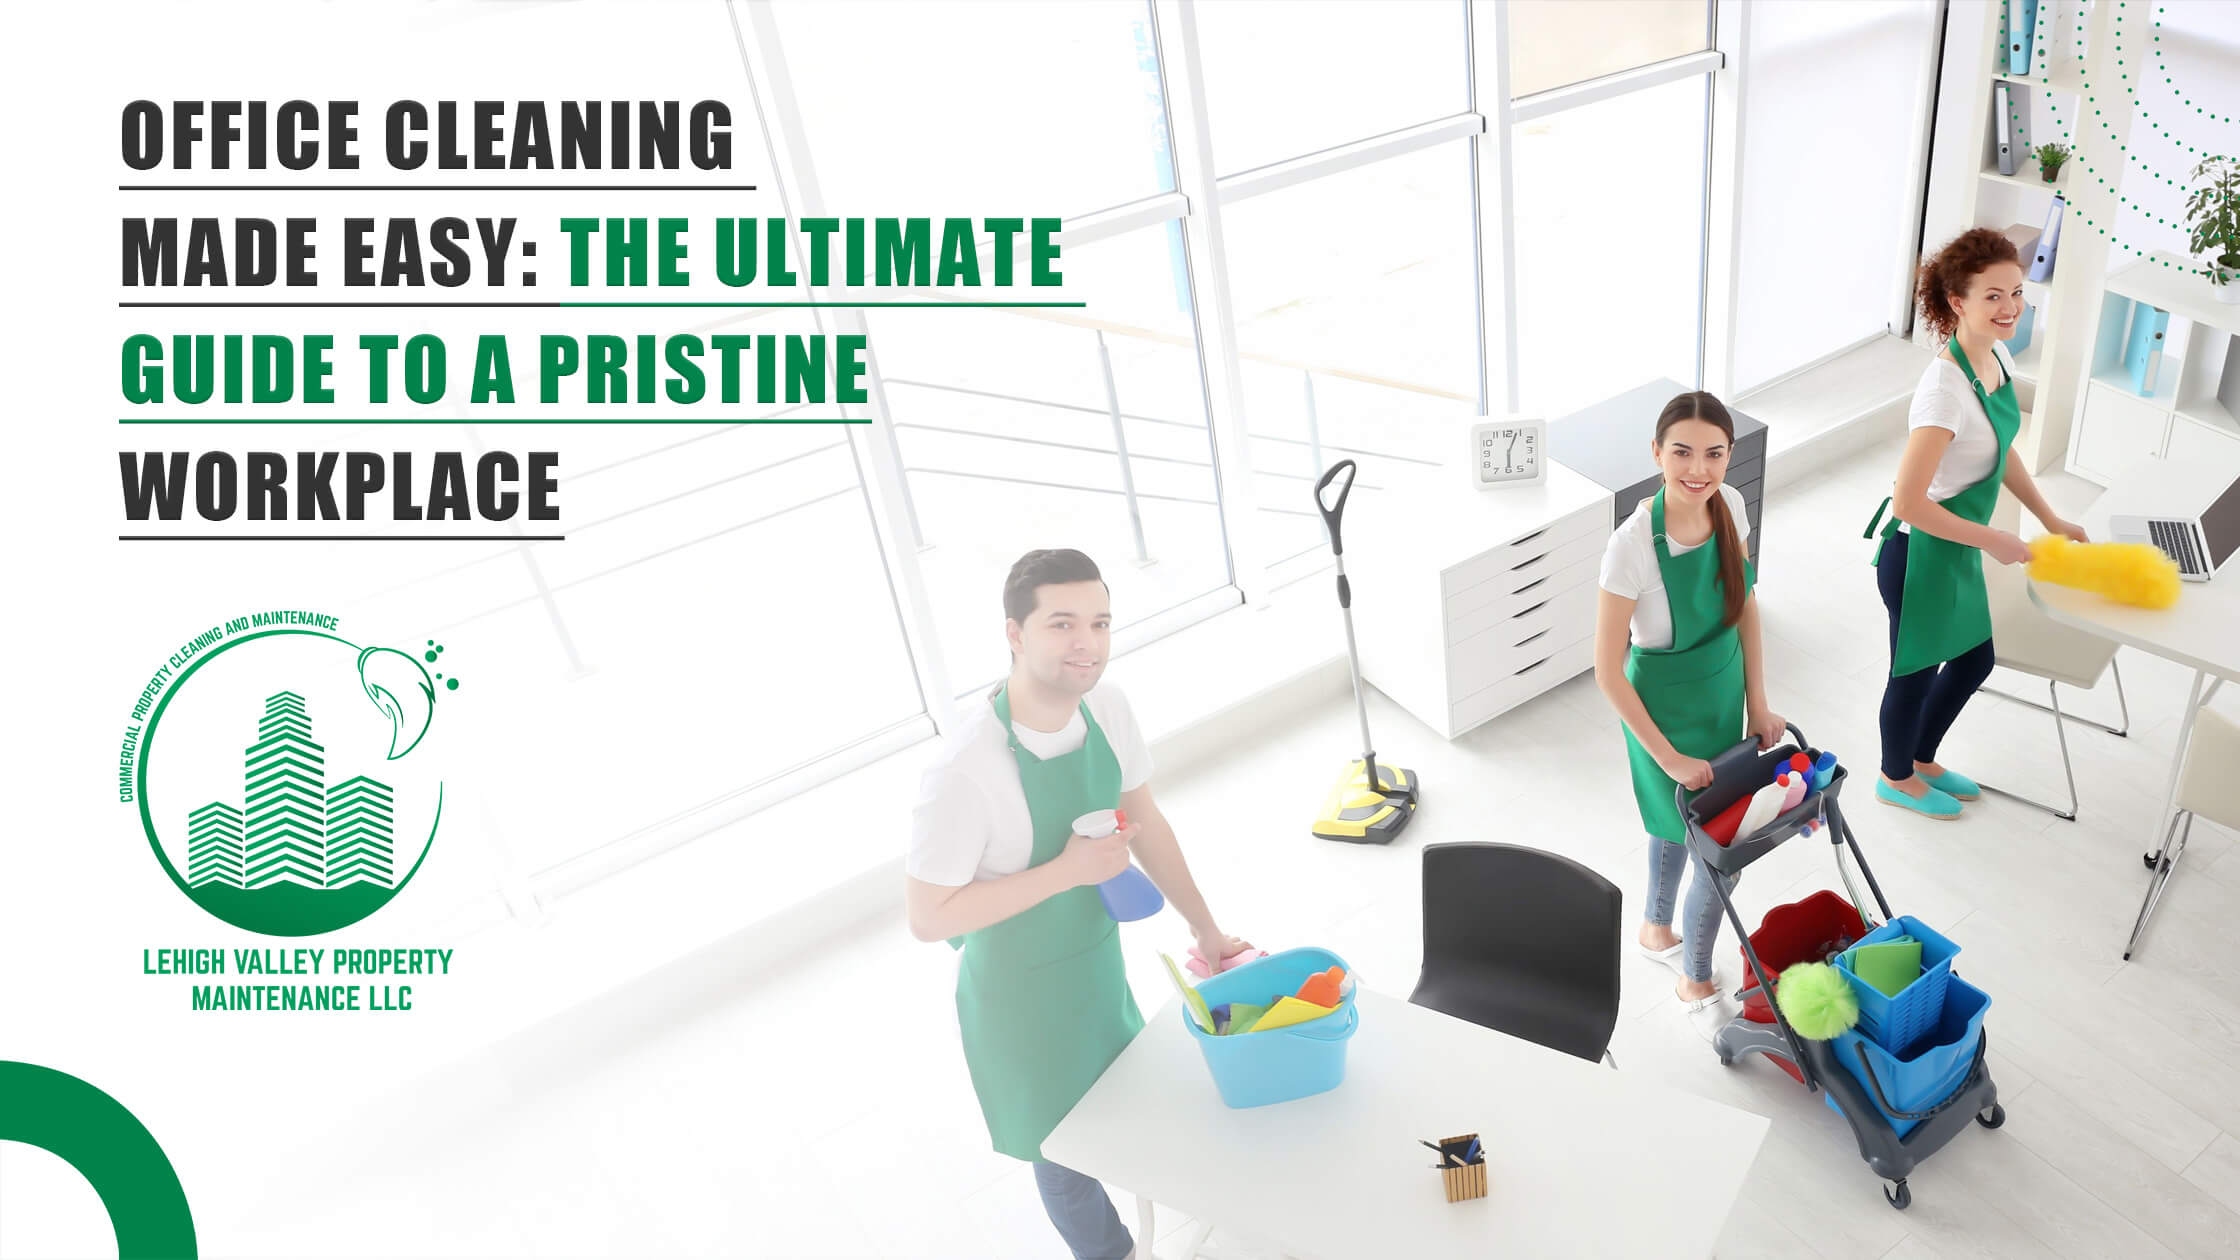 You are currently viewing Office Cleaning Made Easy: The Ultimate Guide to a Pristine Workplace